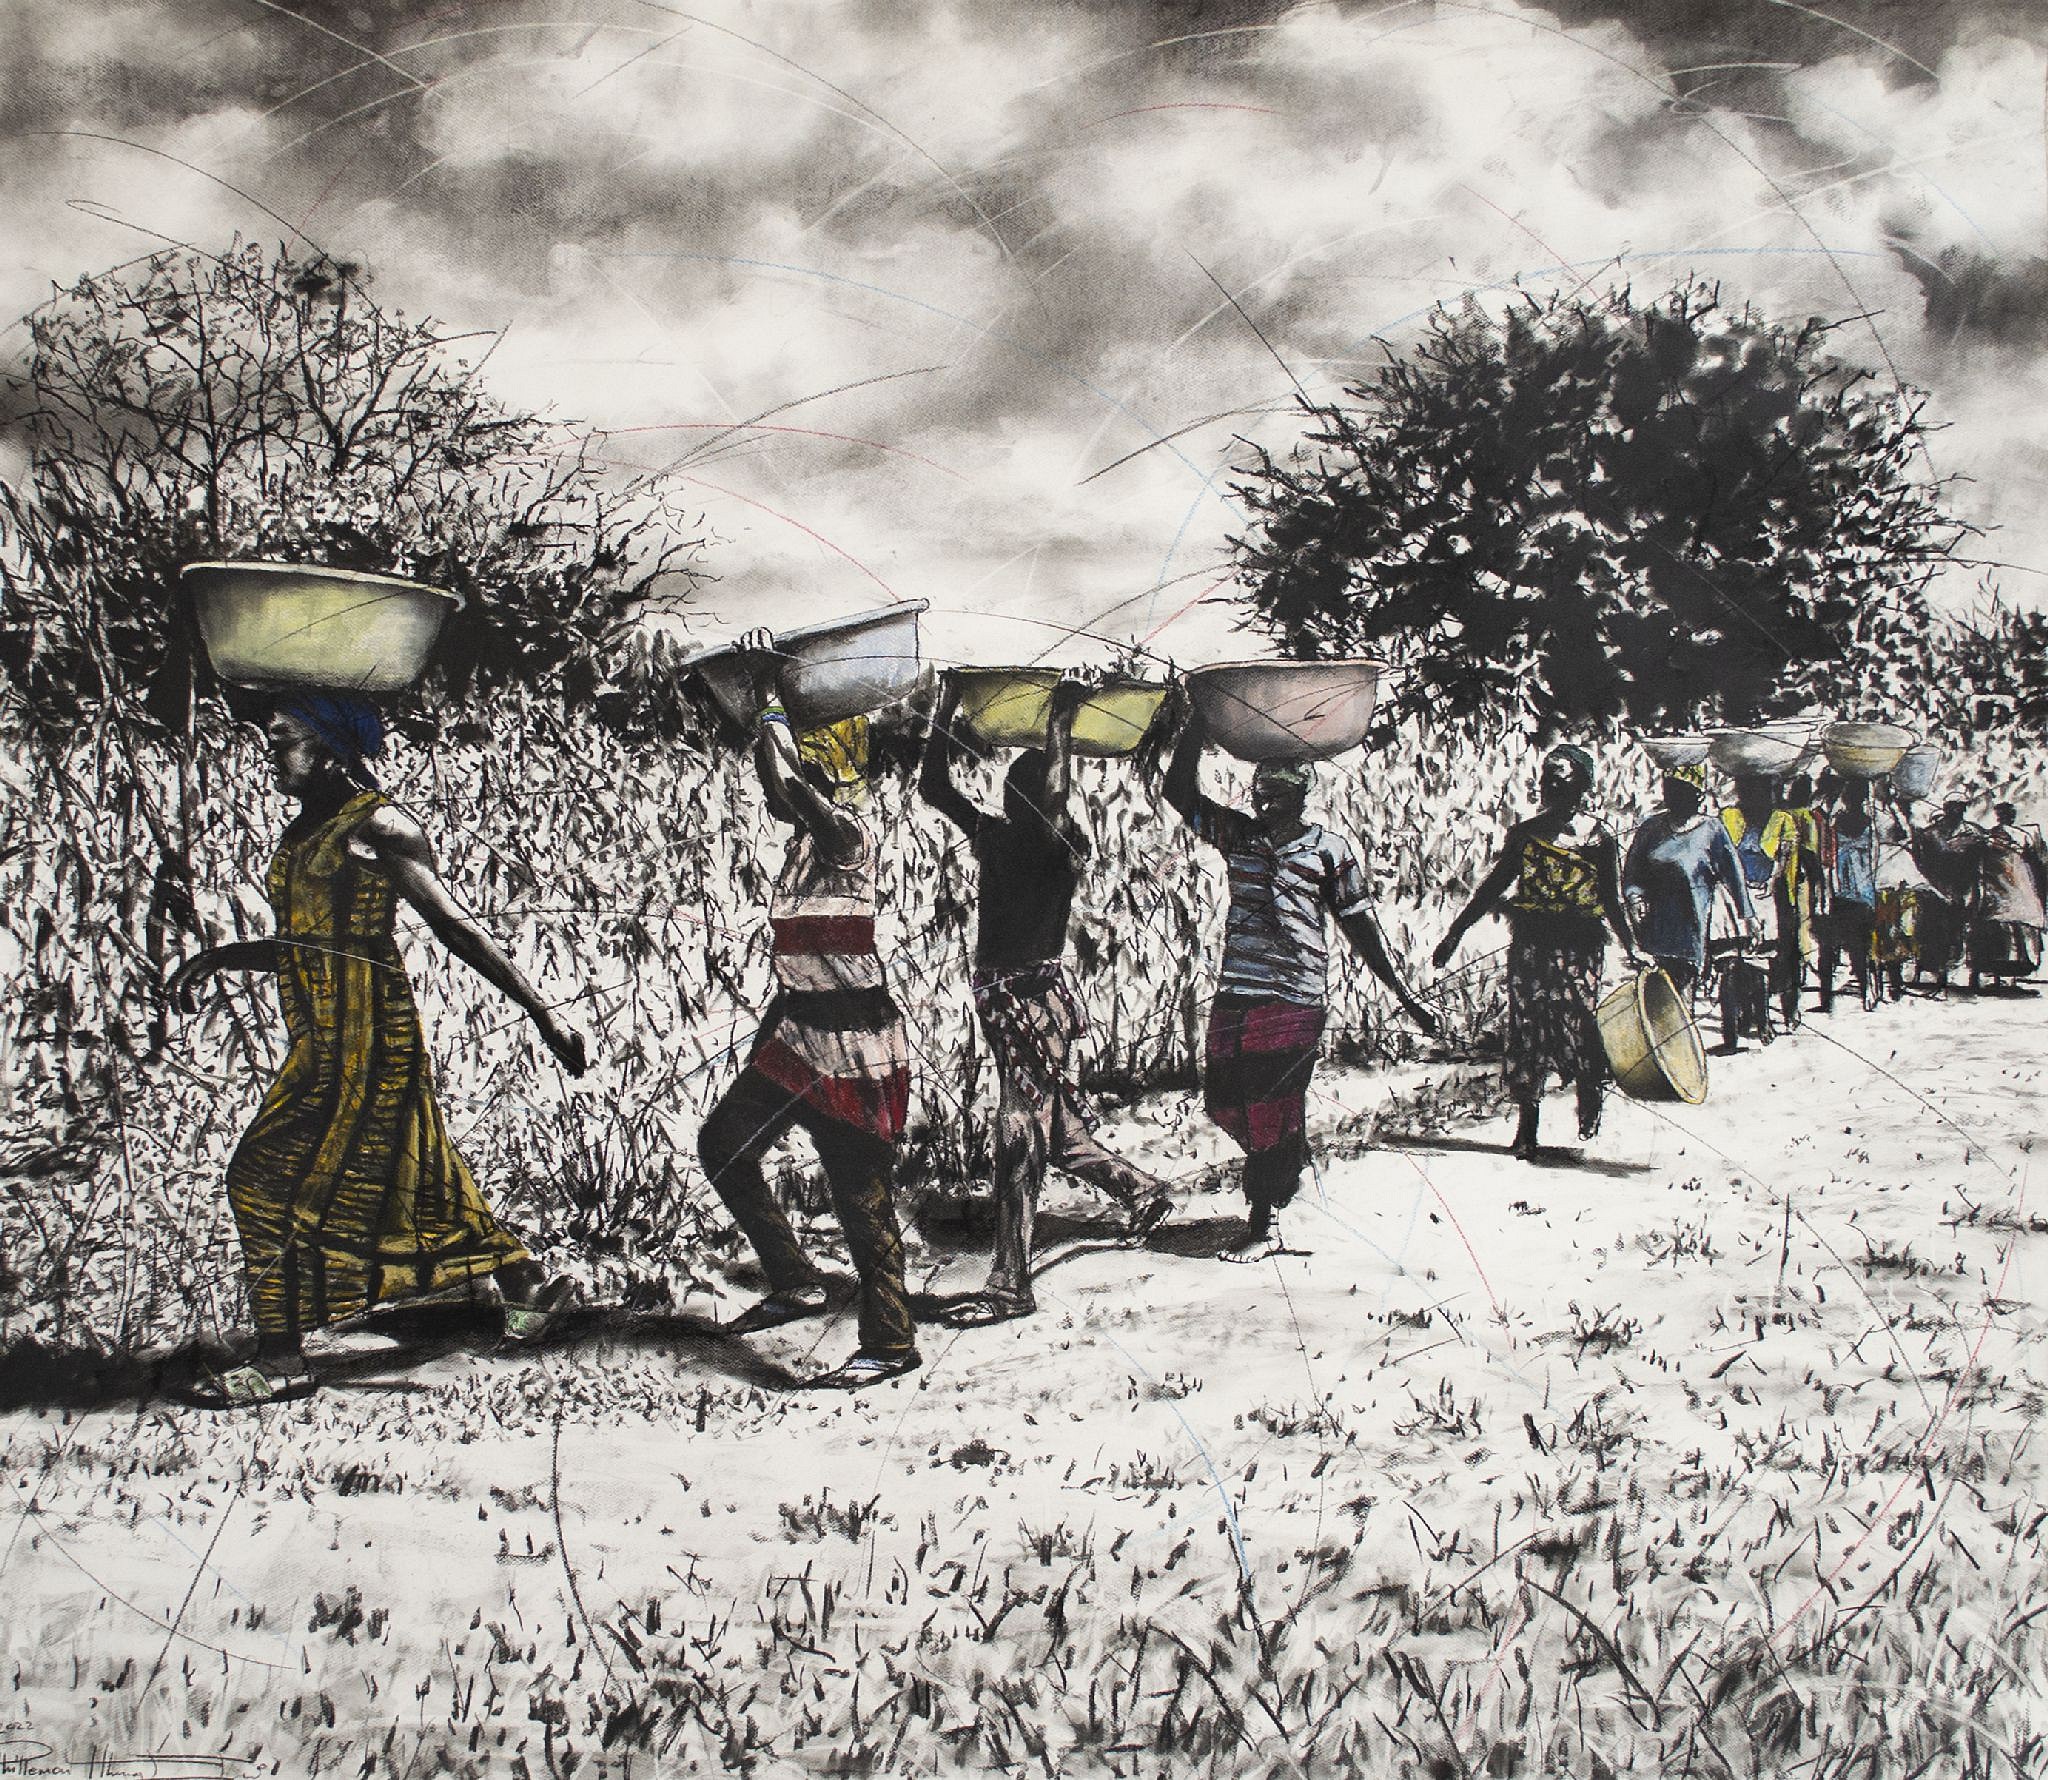 phillemon hlungwani hi vhotele vusweti. ll we voted for poverty ii charcoal and soft pastel on fabriano paper 151cm x 161cm